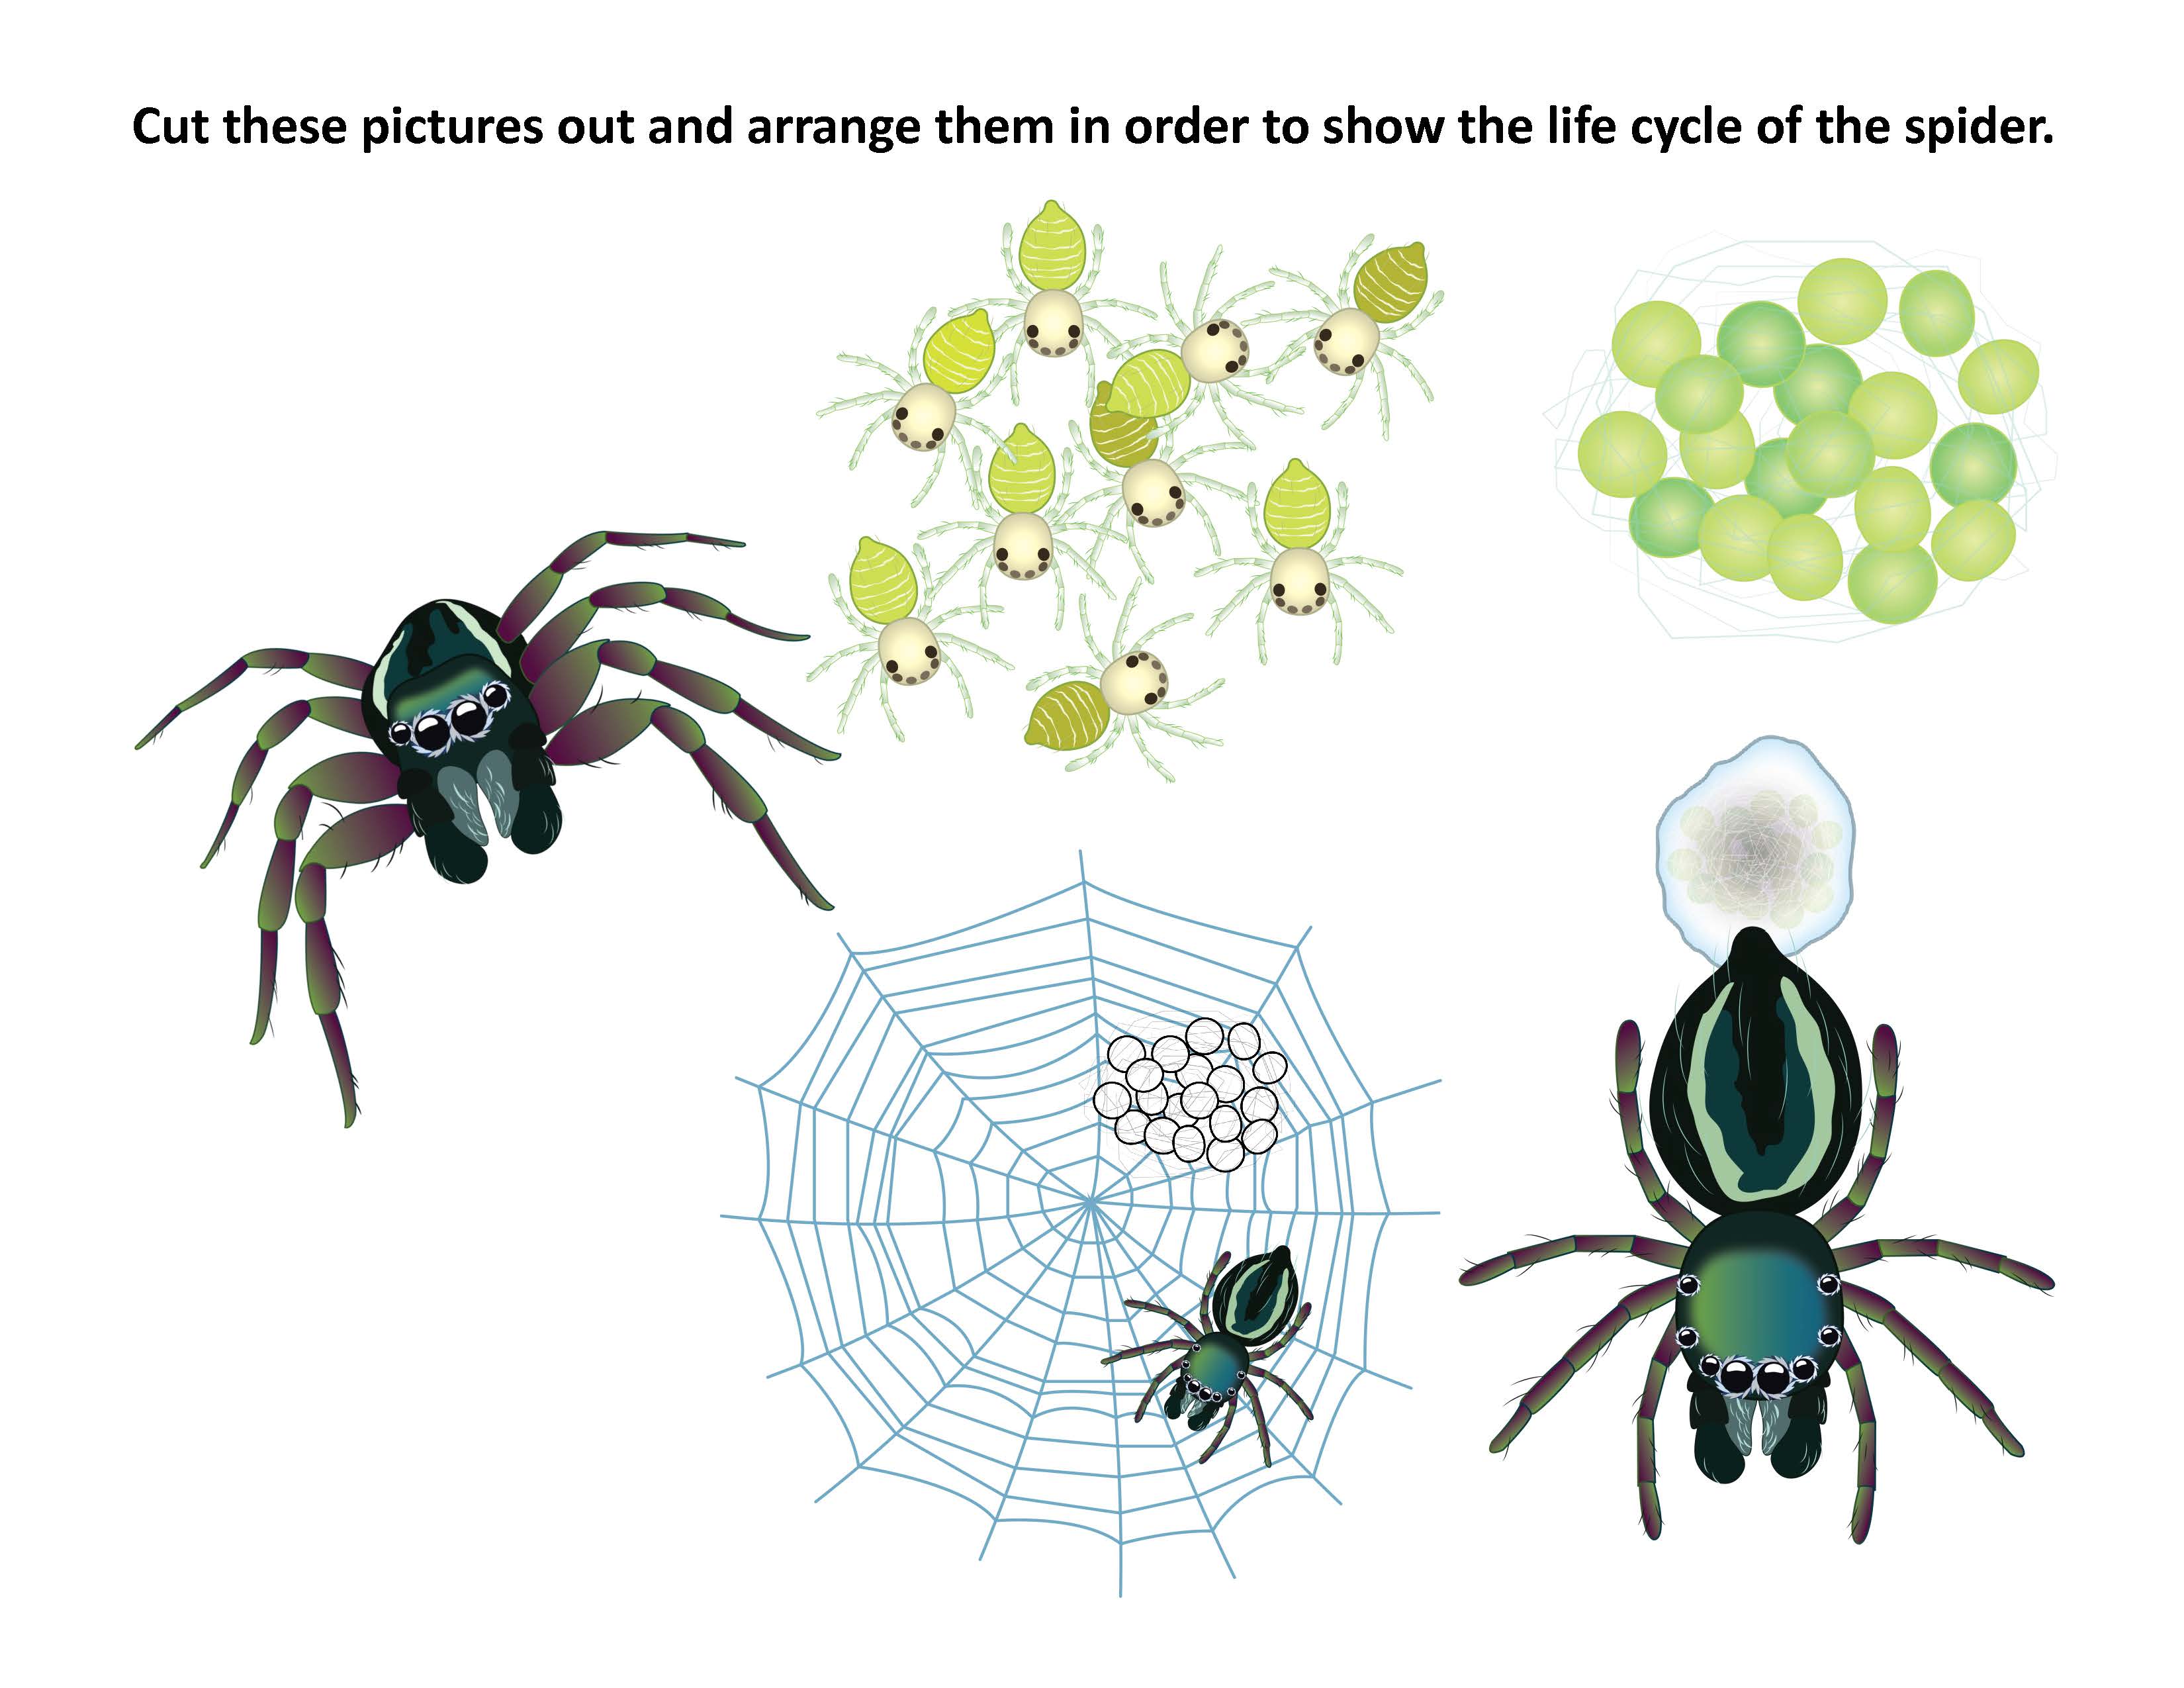 spiders-a-booklet-of-activities-celebrating-the-spider-s-life-cycle